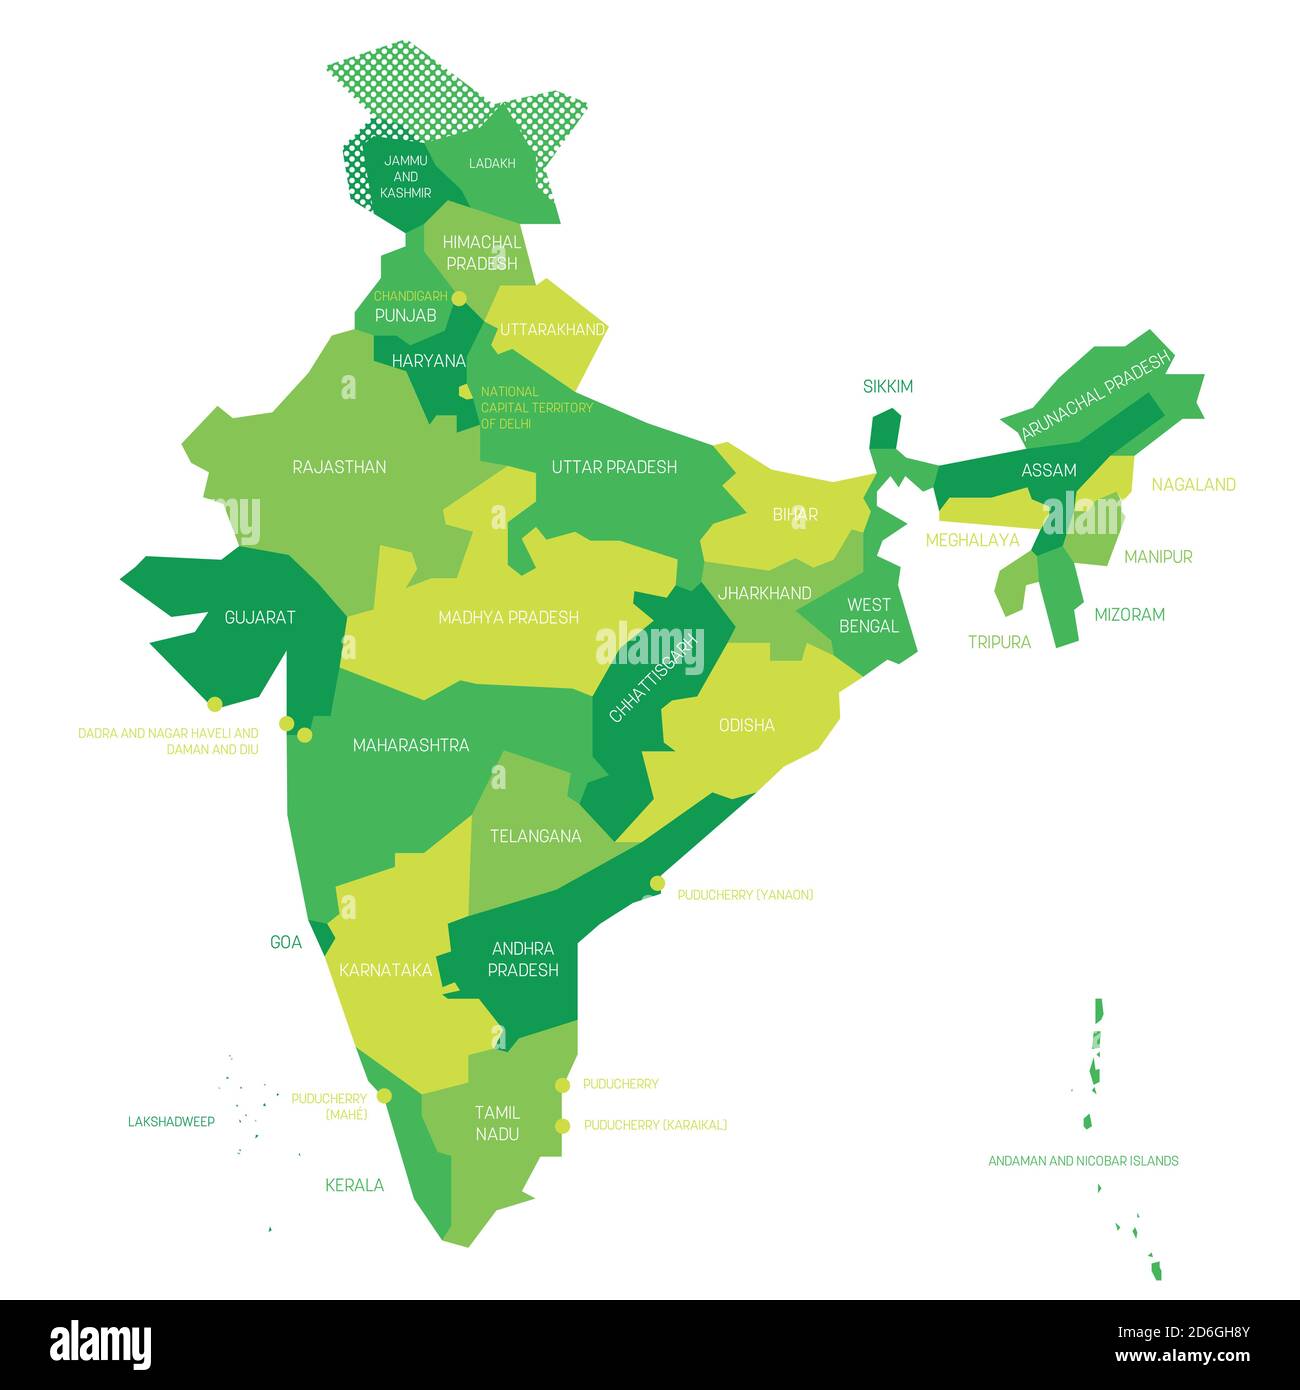 Green political map of India. Administrative divisions - states and union territories. Simple flat vector map with labels. Stock Vector